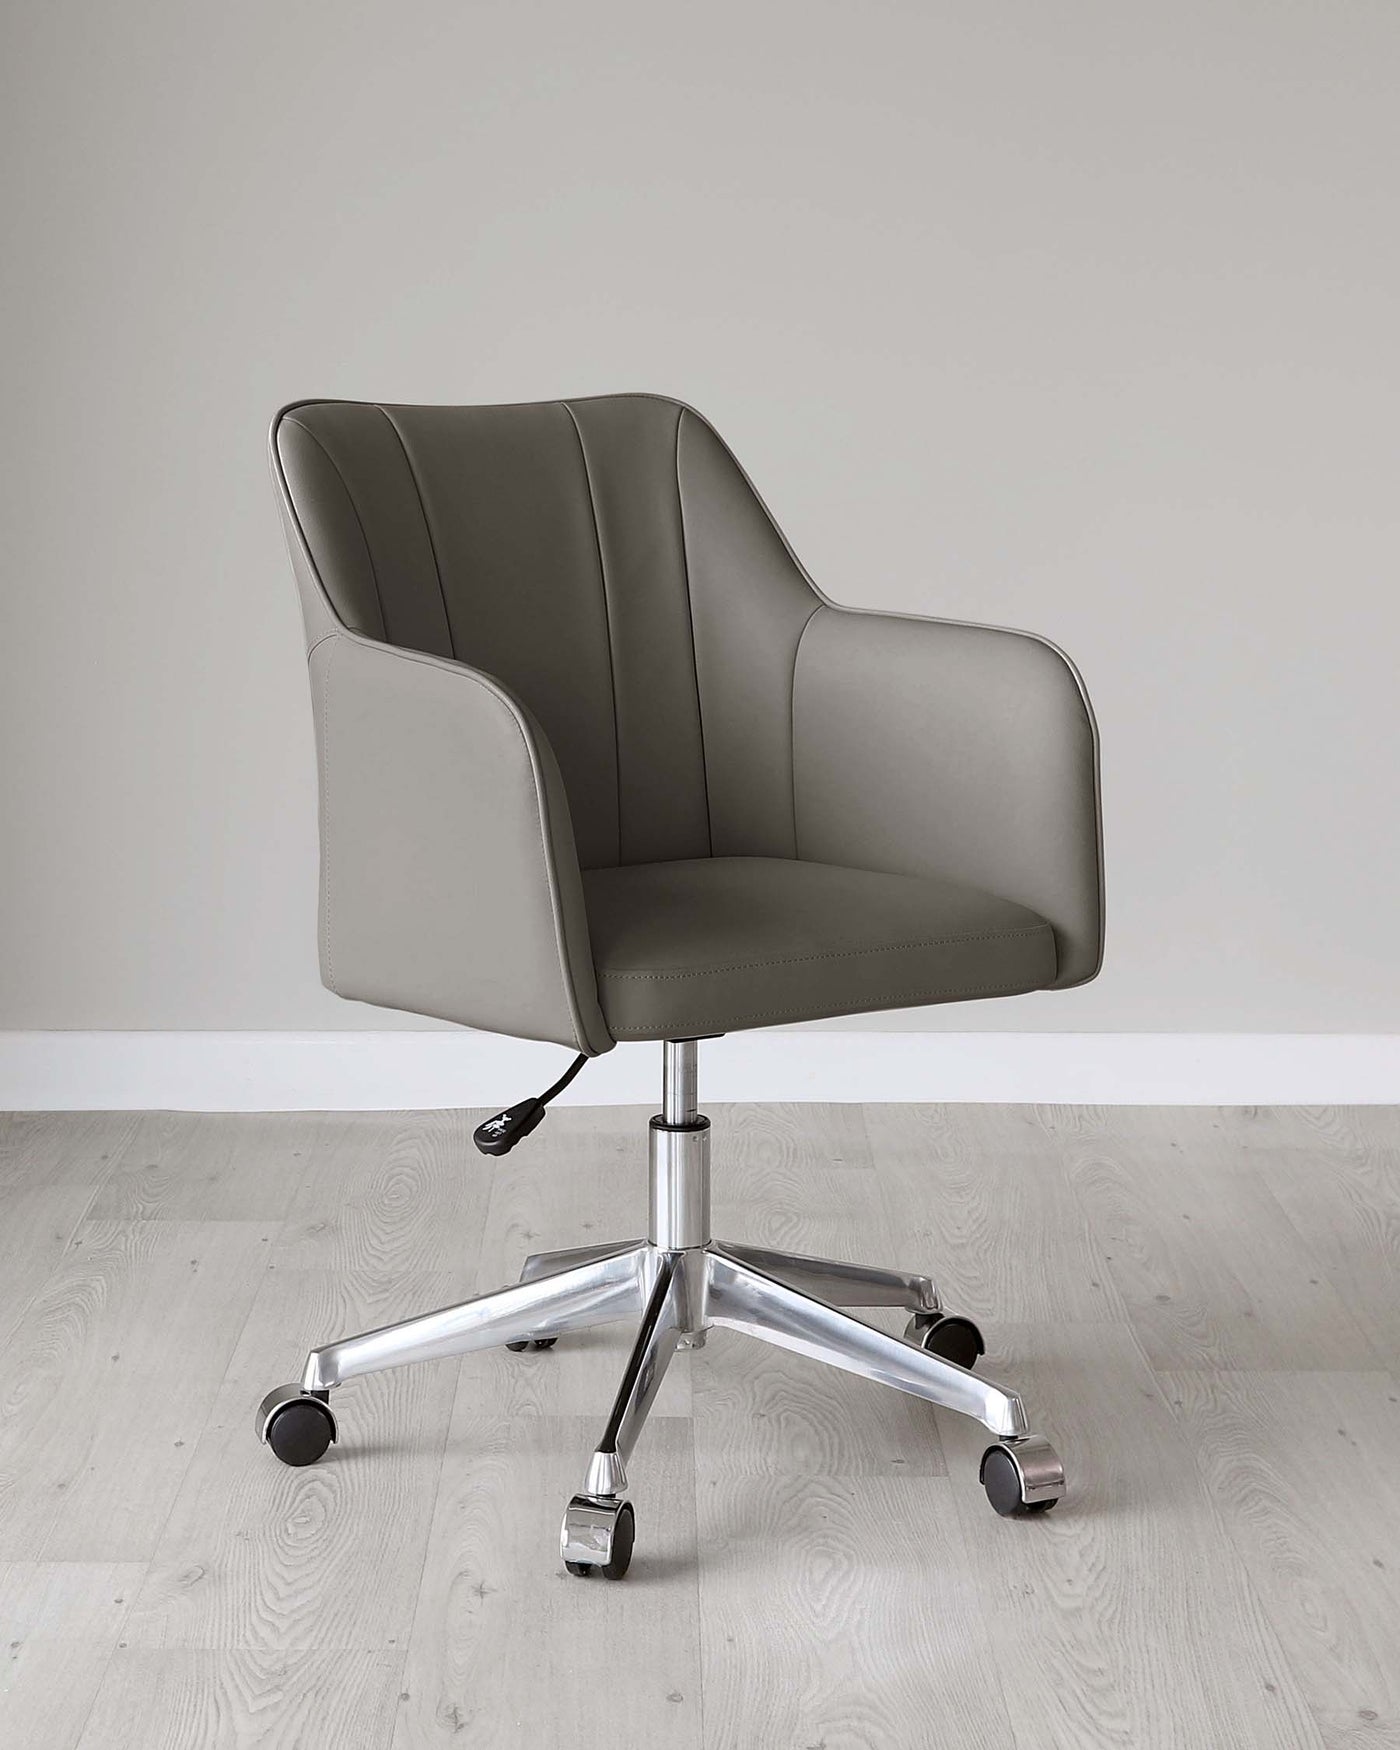 Modern office chair with a high backrest, upholstered in smooth grey fabric with subtle stitching details, featuring white piping on the edges. It is equipped with a pneumatic seat height adjustment lever on the right side. The base consists of a shiny chrome frame with five branching legs, each ending in black caster wheels for mobility. The chair is set on a light wooden floor against a clean, white background.